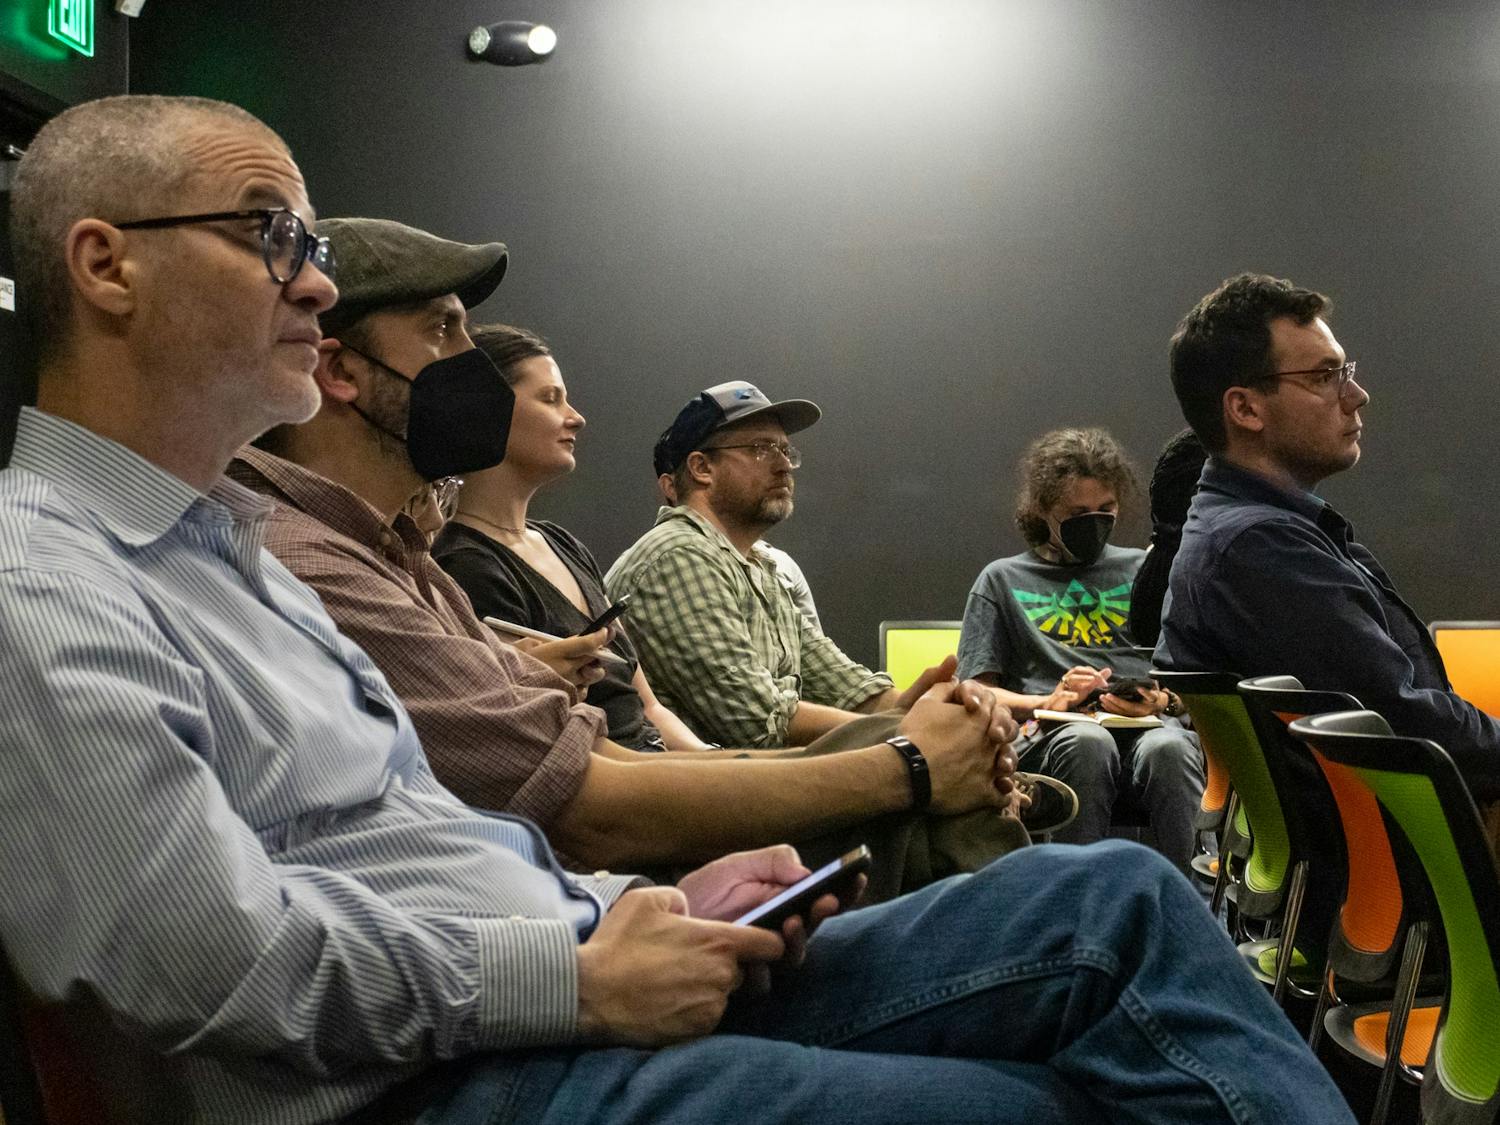 Gaming scholars and artists gather for the first UNC-Duke Critical Games Symposium on Friday, Feb. 24, 2023, in UNC's Media Art Space. The symposium focuses on the critical study and practice of video games. 
Photo Courtesy of Emily Chambliss.